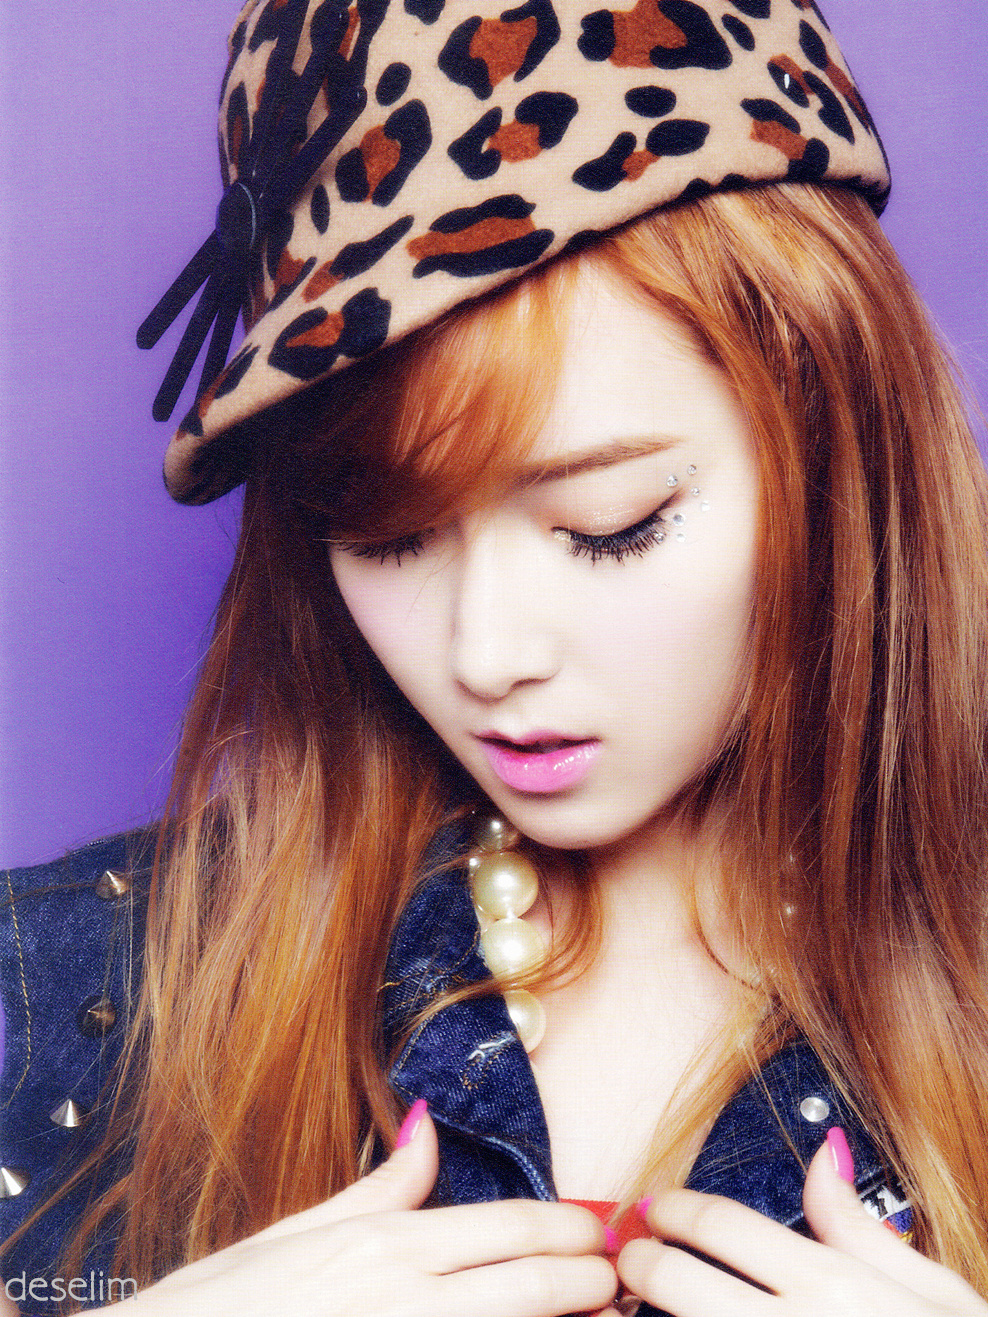 Jessica Snsd Image HD Wallpaper And Background Photos